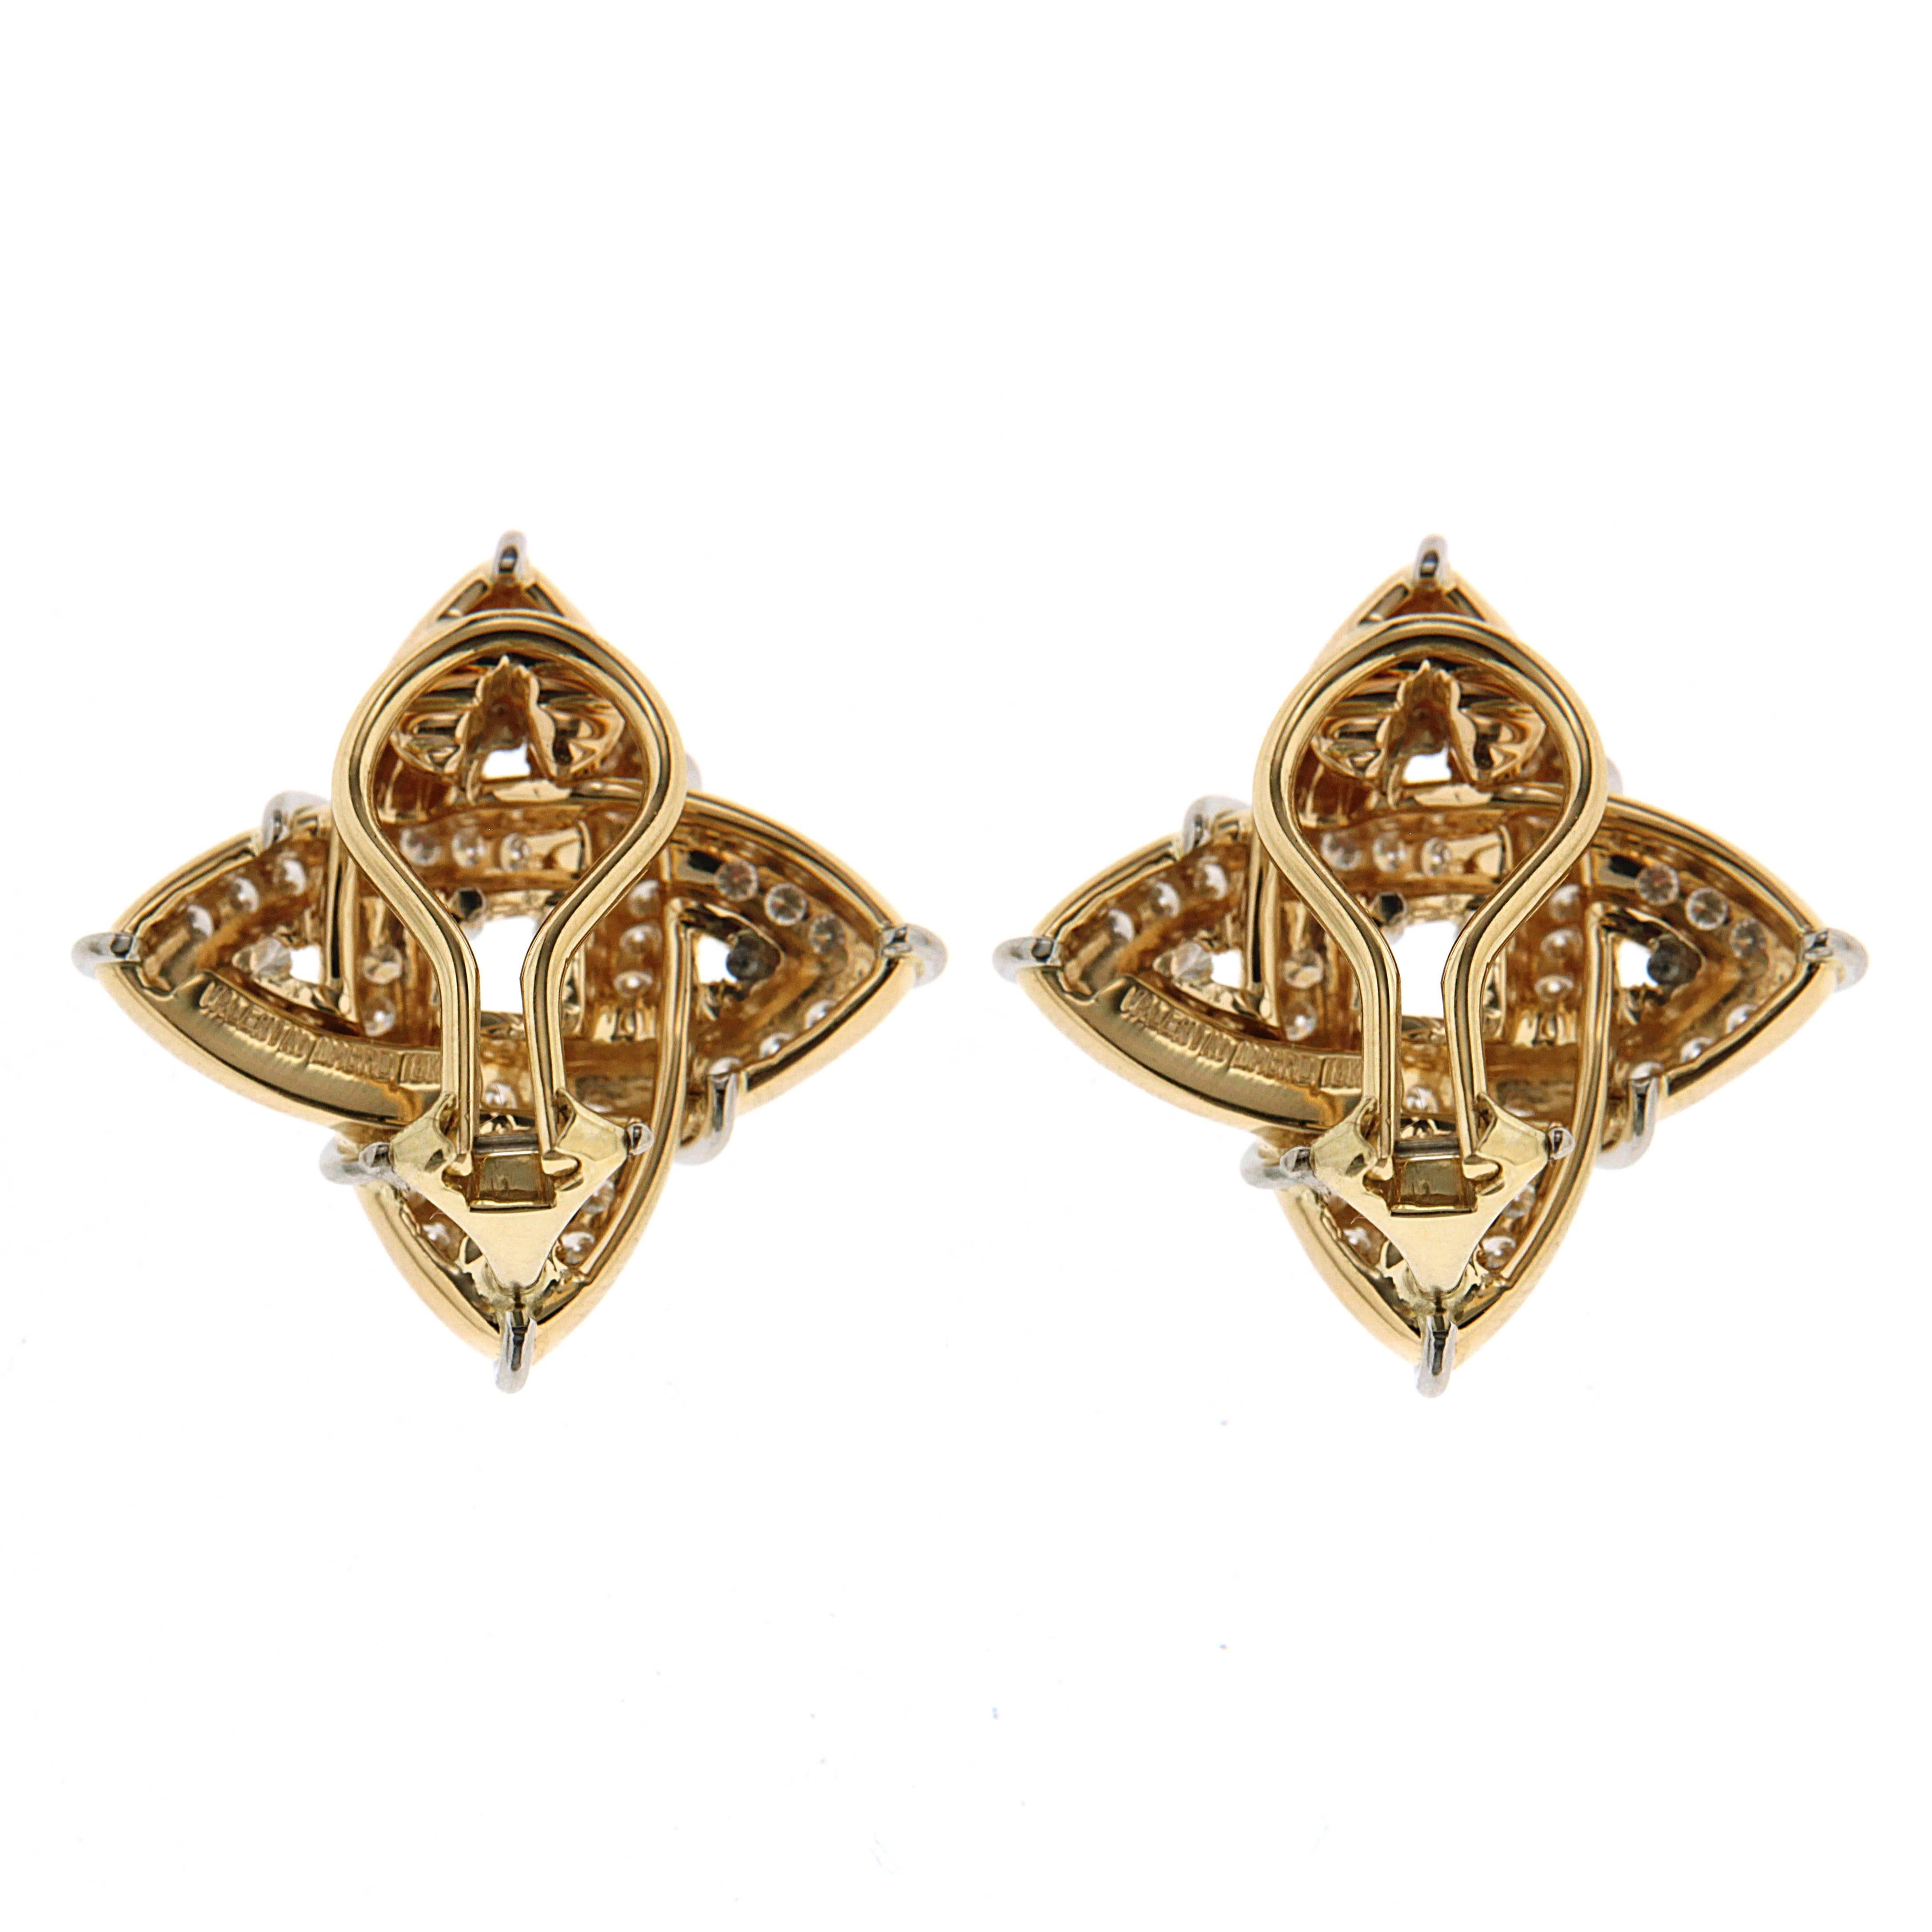 Valentin Magro 18K Yellow Gold Gothic Earrings with Single Line of Diamonds and Platinum Wires. Finished with Clip backs.